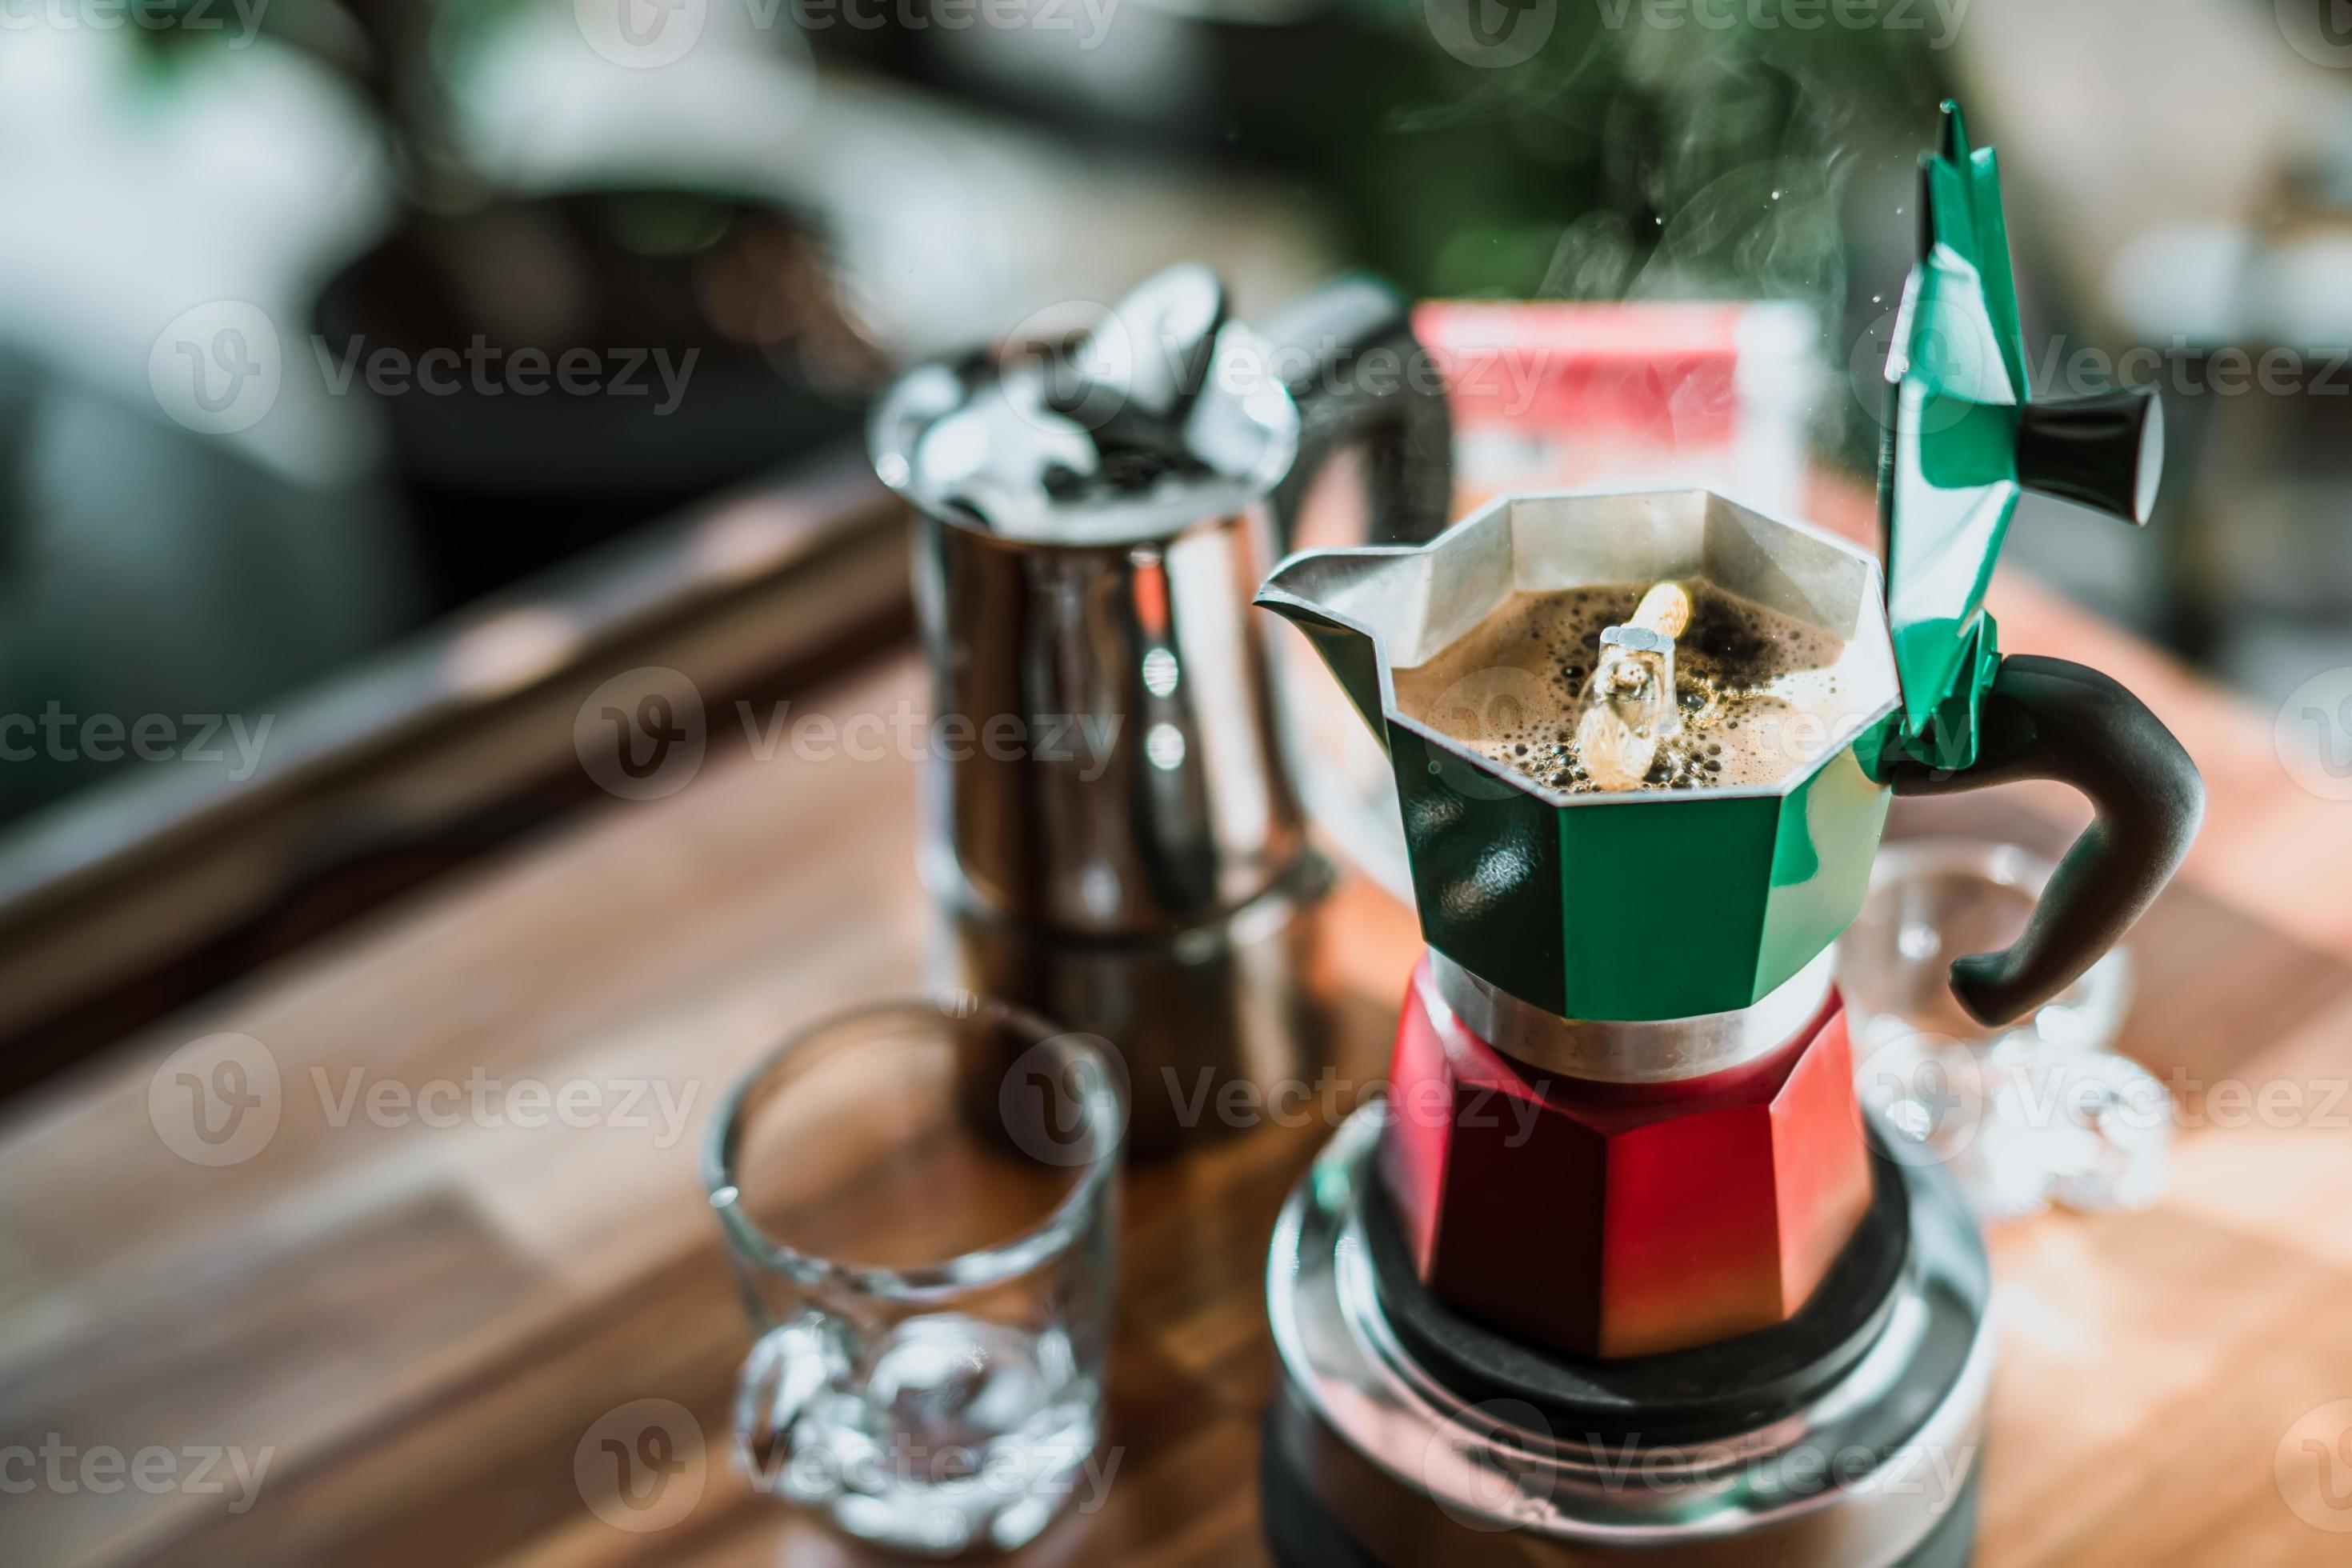 https://static.vecteezy.com/system/resources/previews/006/965/677/large_2x/hot-coffee-in-moka-pot-on-electric-stove-vintage-coffee-maker-on-wooden-table-at-home-selective-focus-photo.jpg